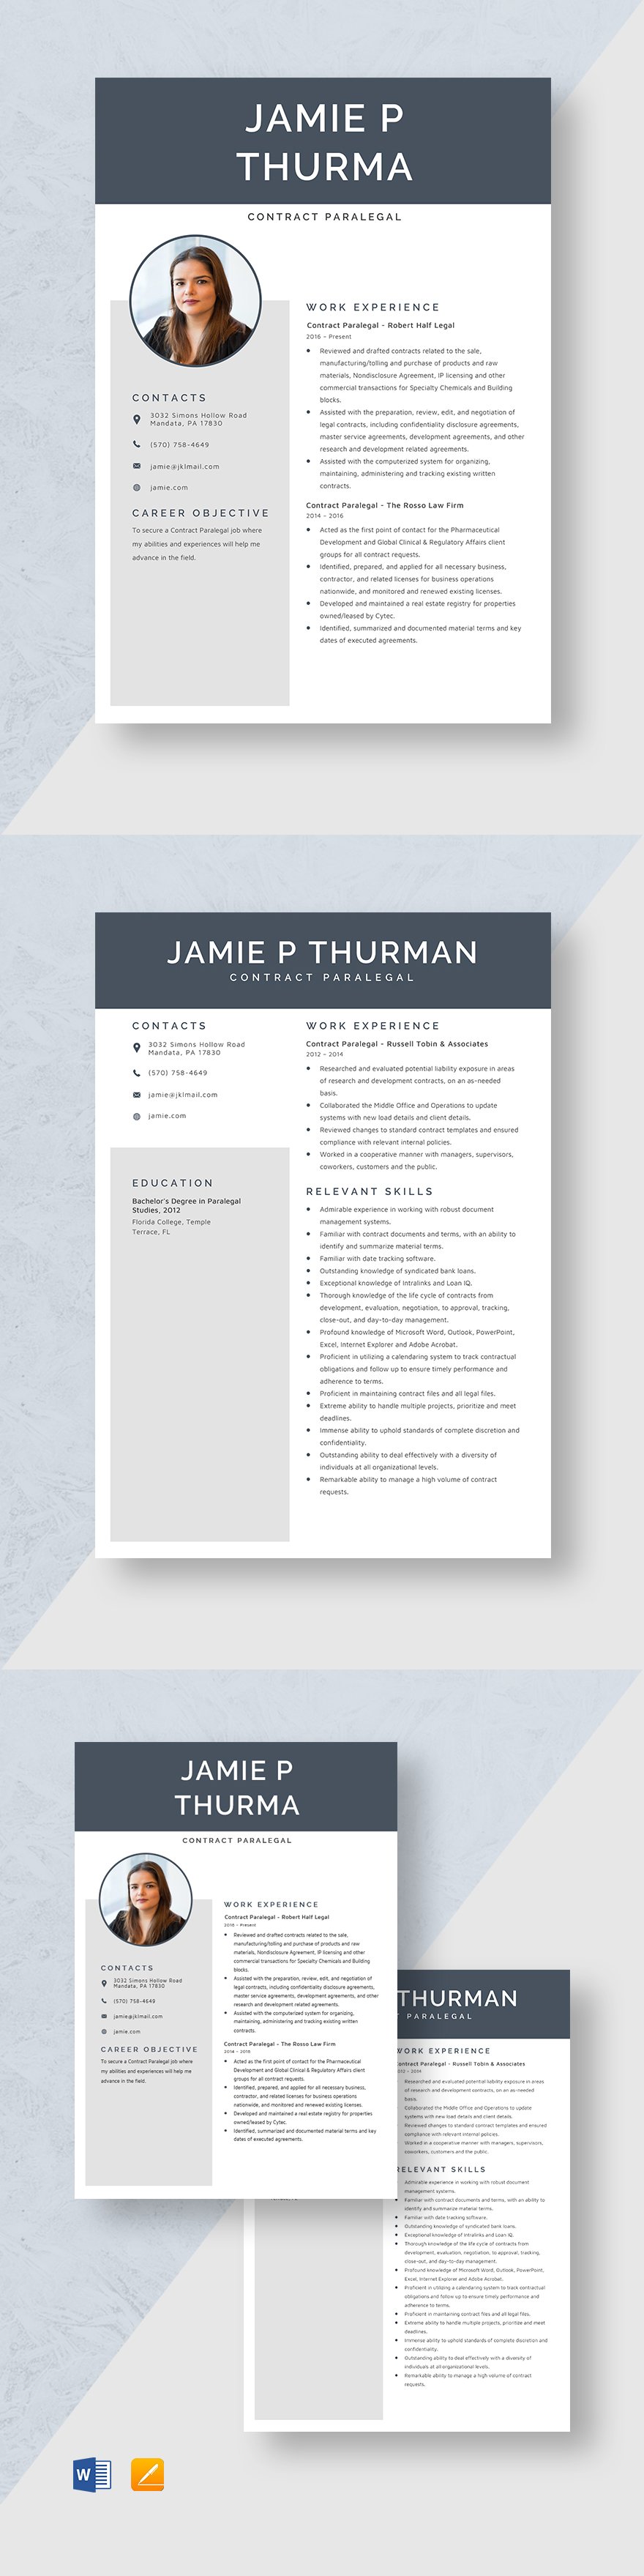 Paralegal Resume Templates 10  Designs Free Downloads Template net